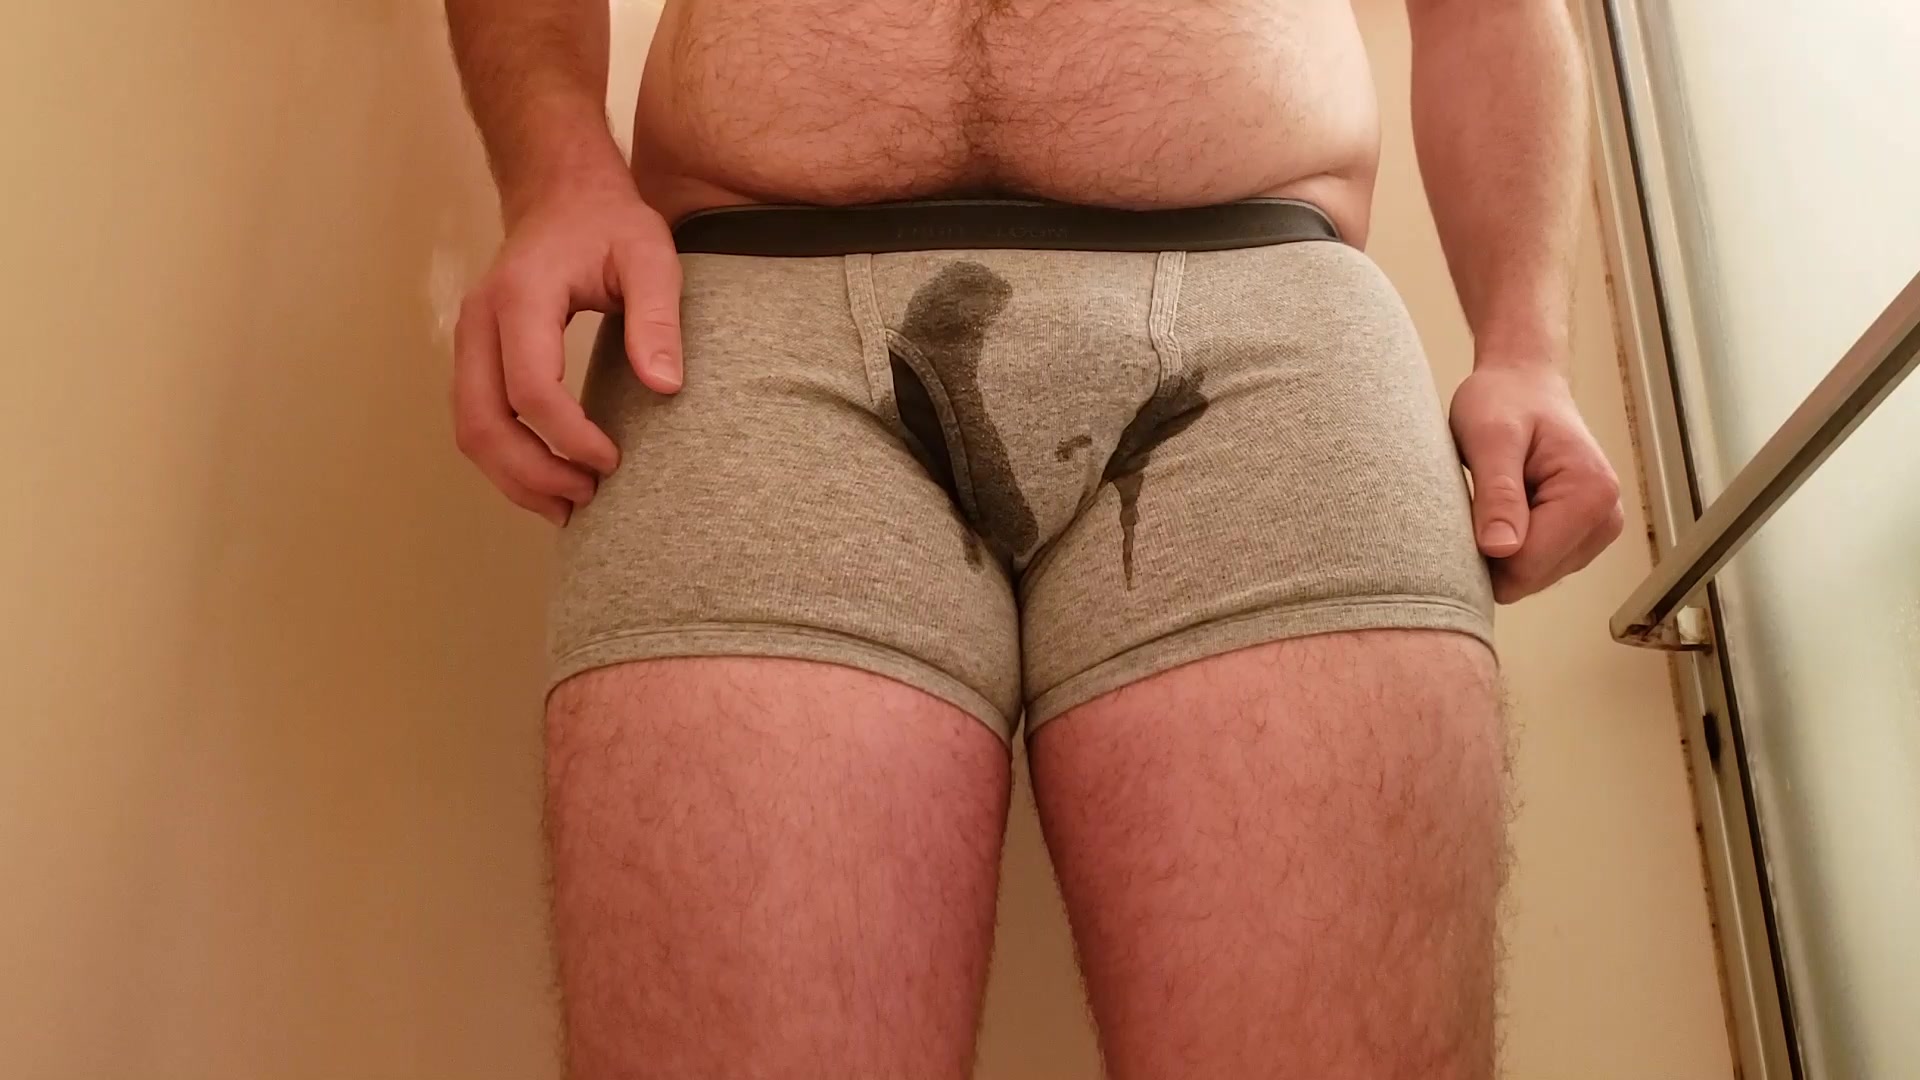 Pissing and shitting my underwear